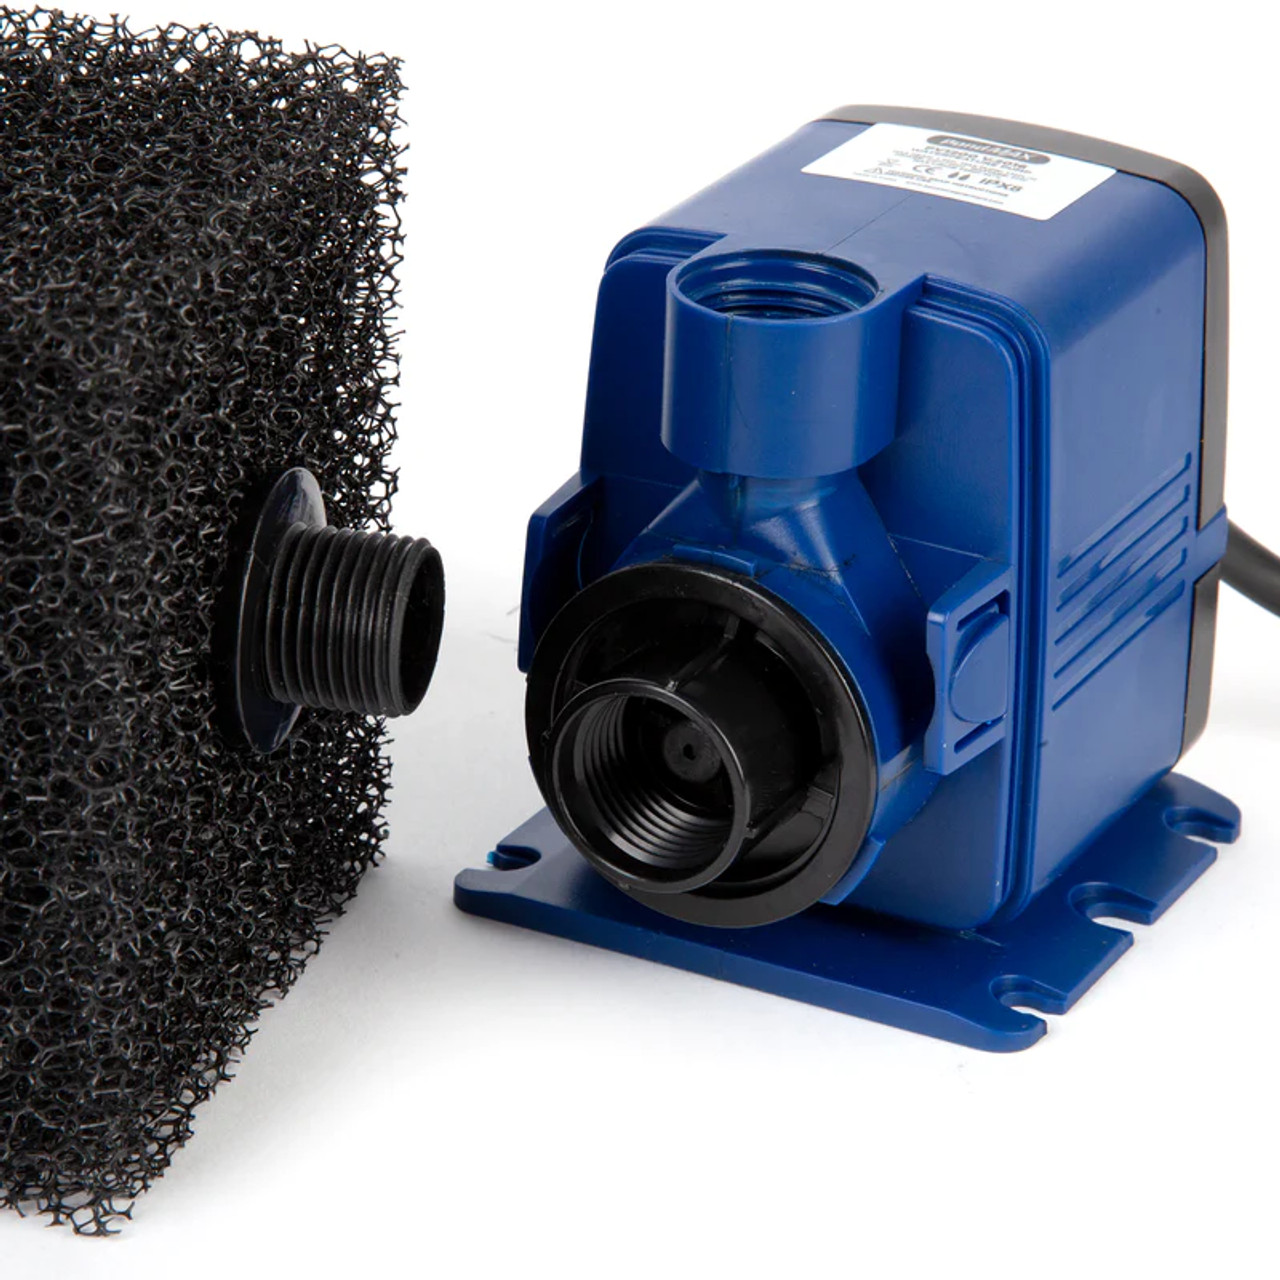 PondMAX Water Feature Pump PV1600 Product image 4